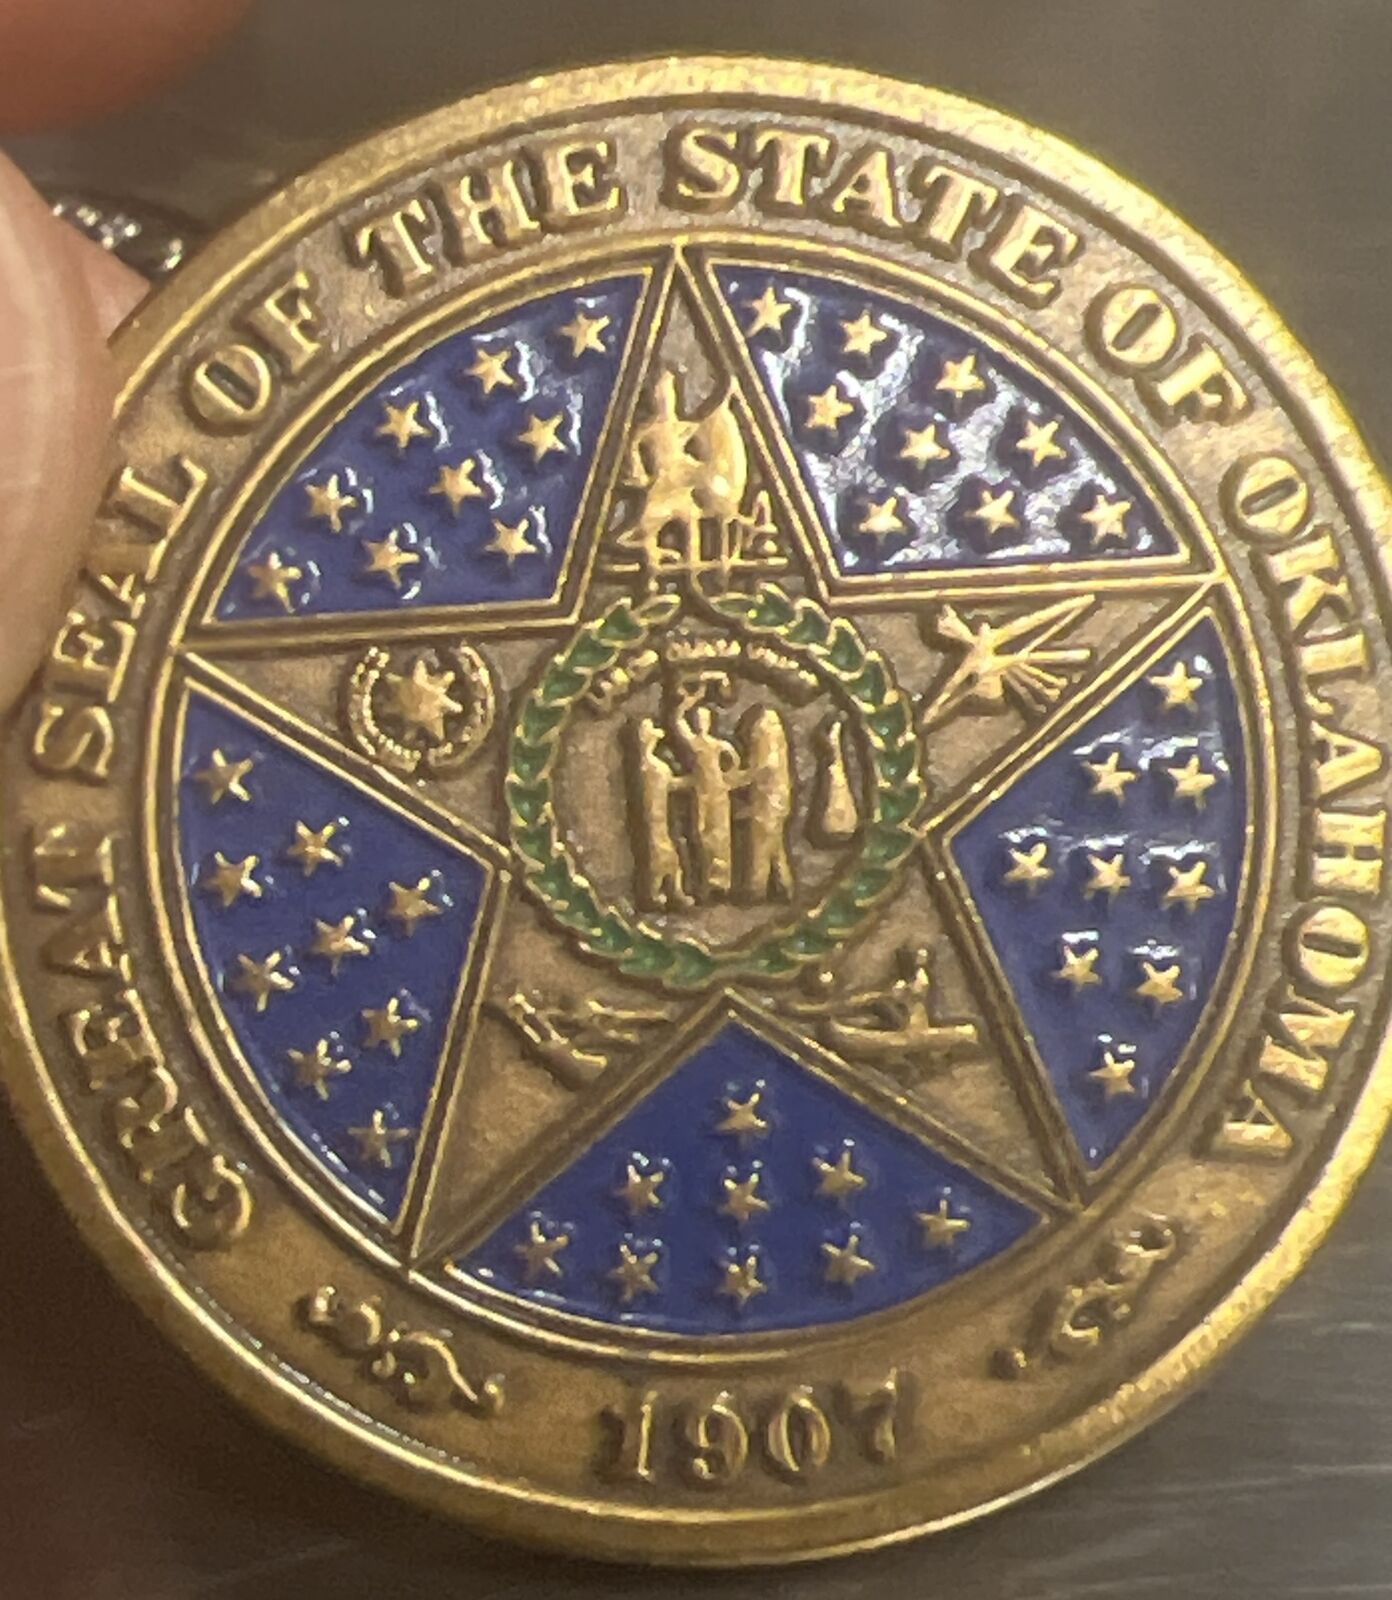 OKLAHOMA (OK) State Seal 1907 Colorized Collectible Challenge Coin heavy